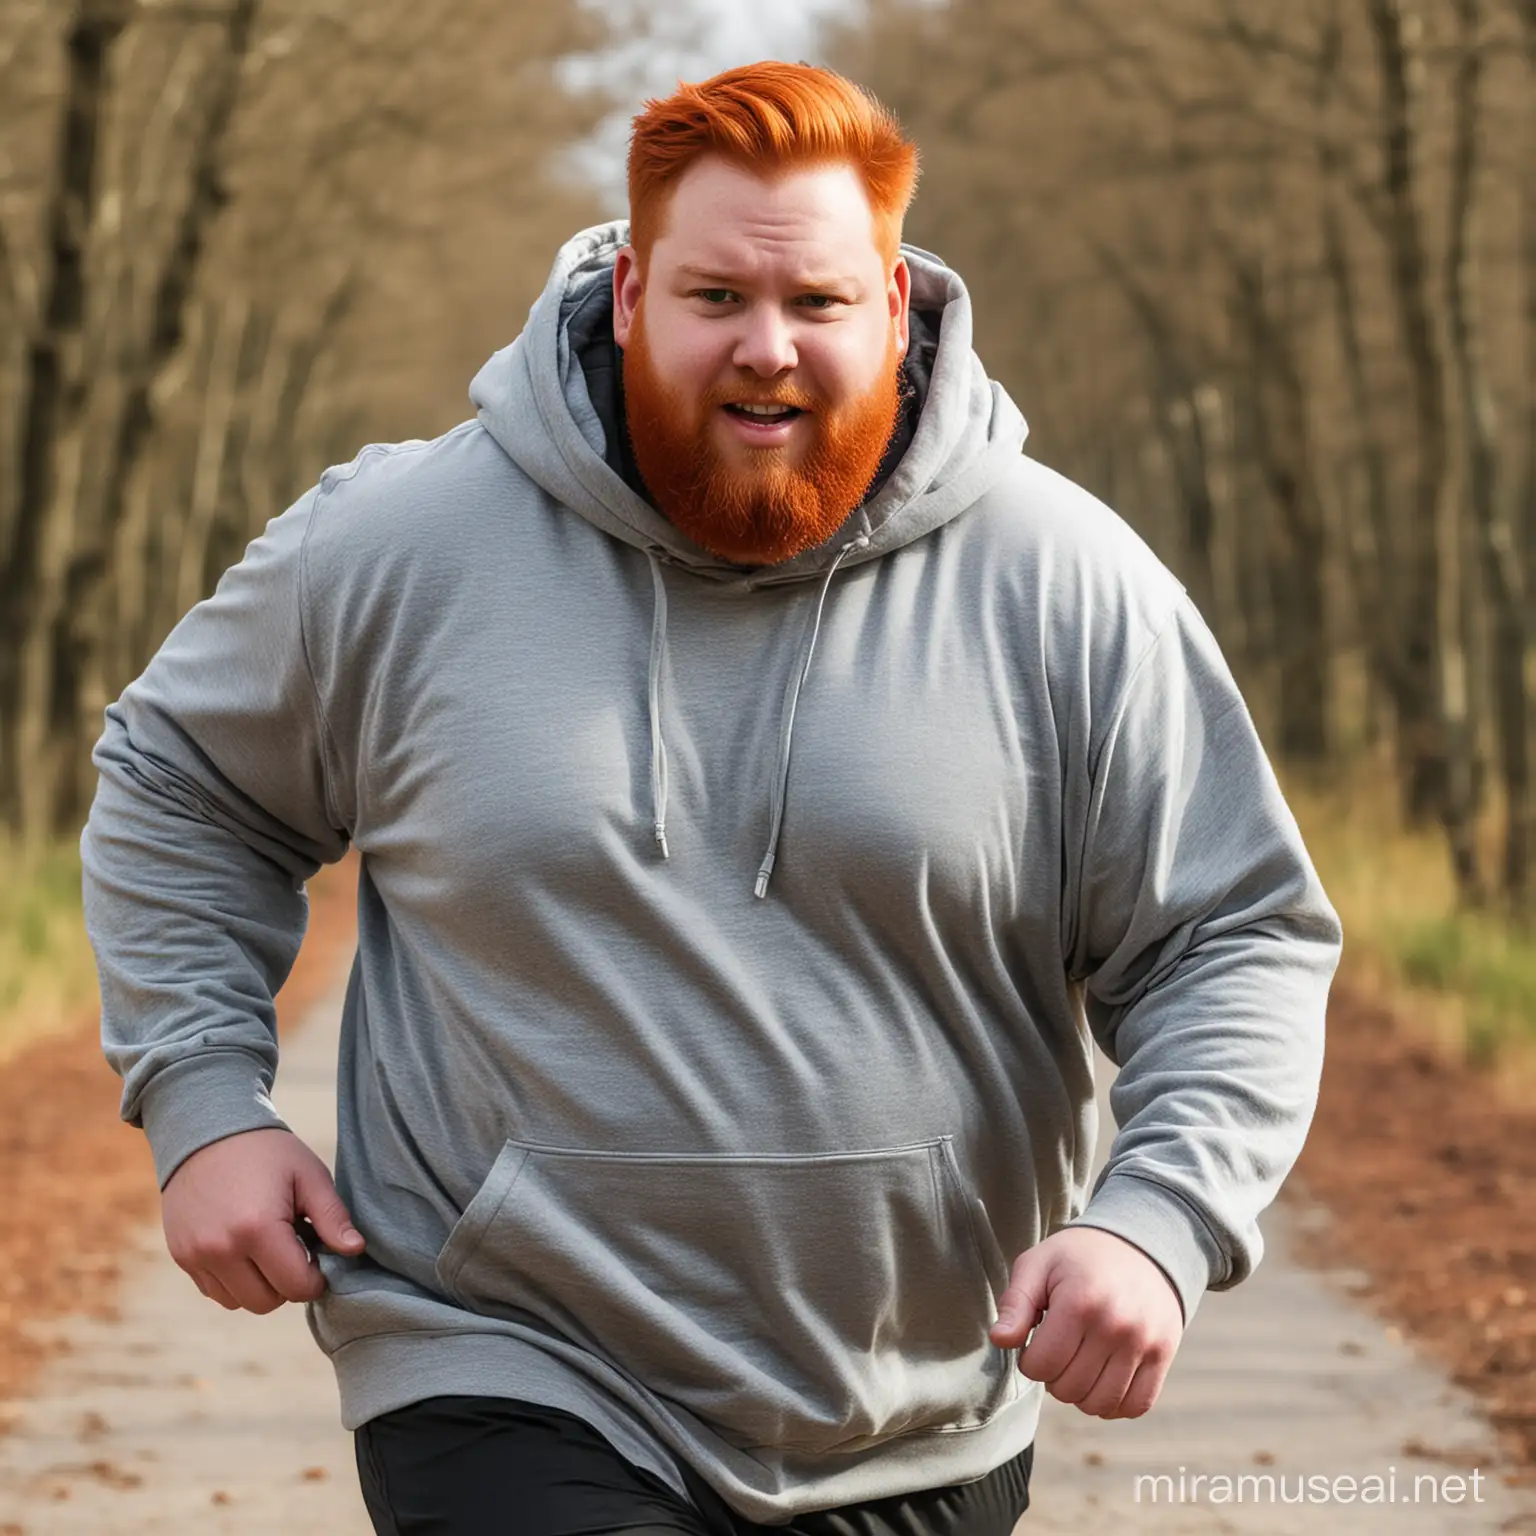 Make a fat man with red hair and a hoodie on running outside